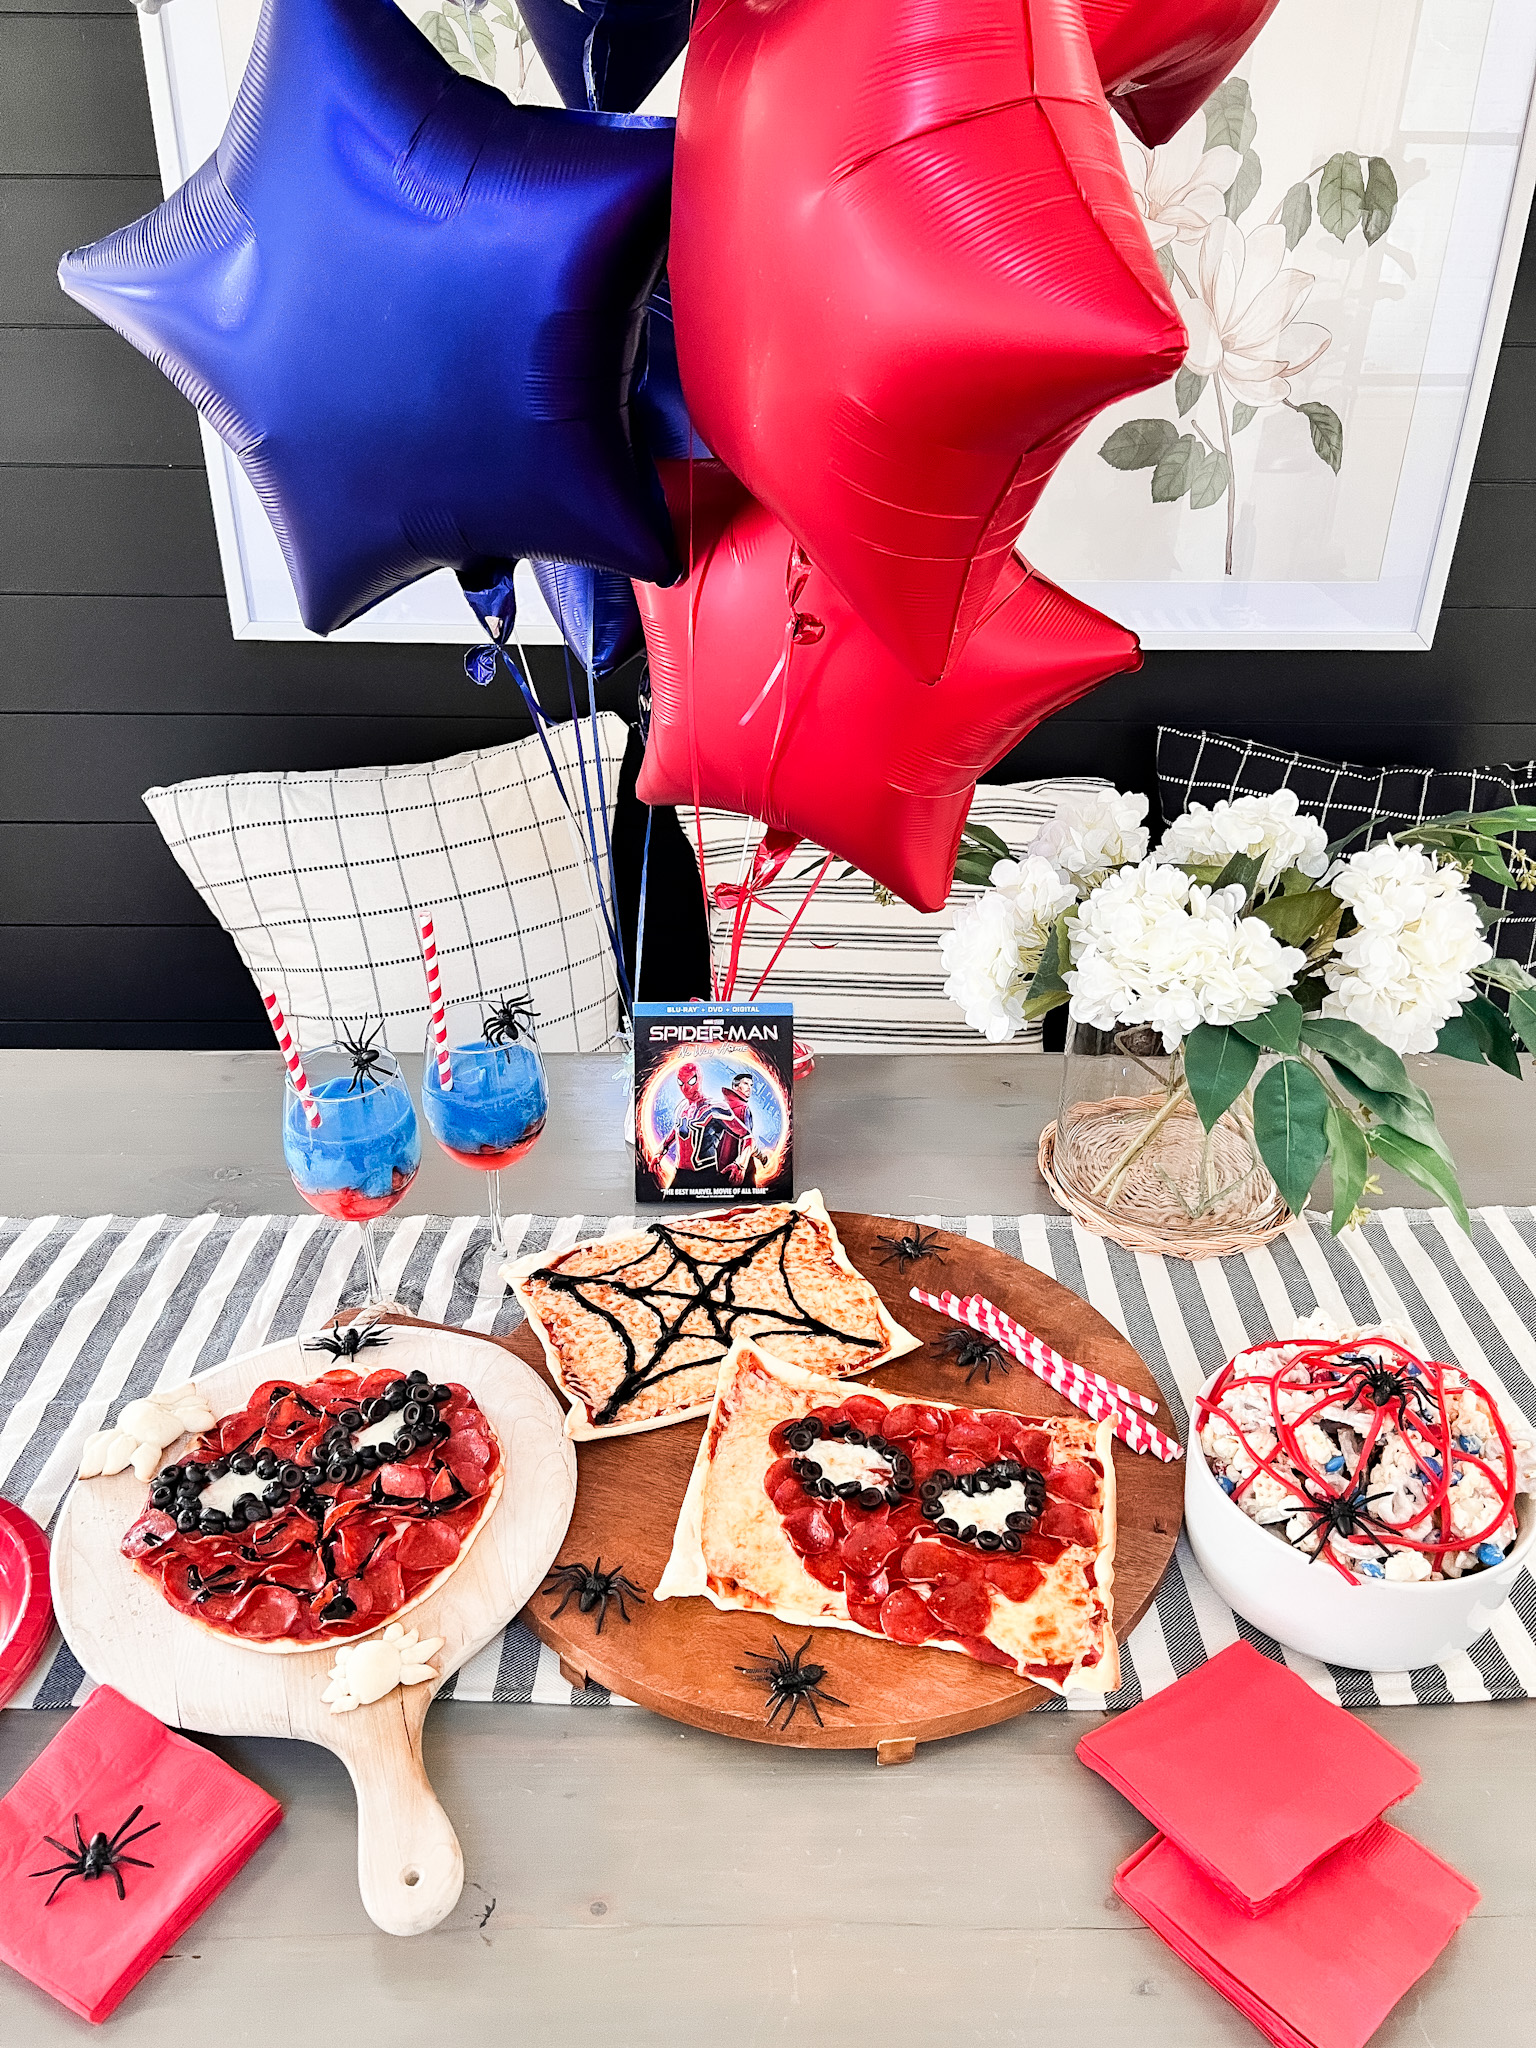 Family Movie Night with Spider-Man: No Way Home! #sponsored #SpiderManNoWayHome is available on Blu-ray and Digital. Pin curated by @tatertotsandjello for @sonypictures